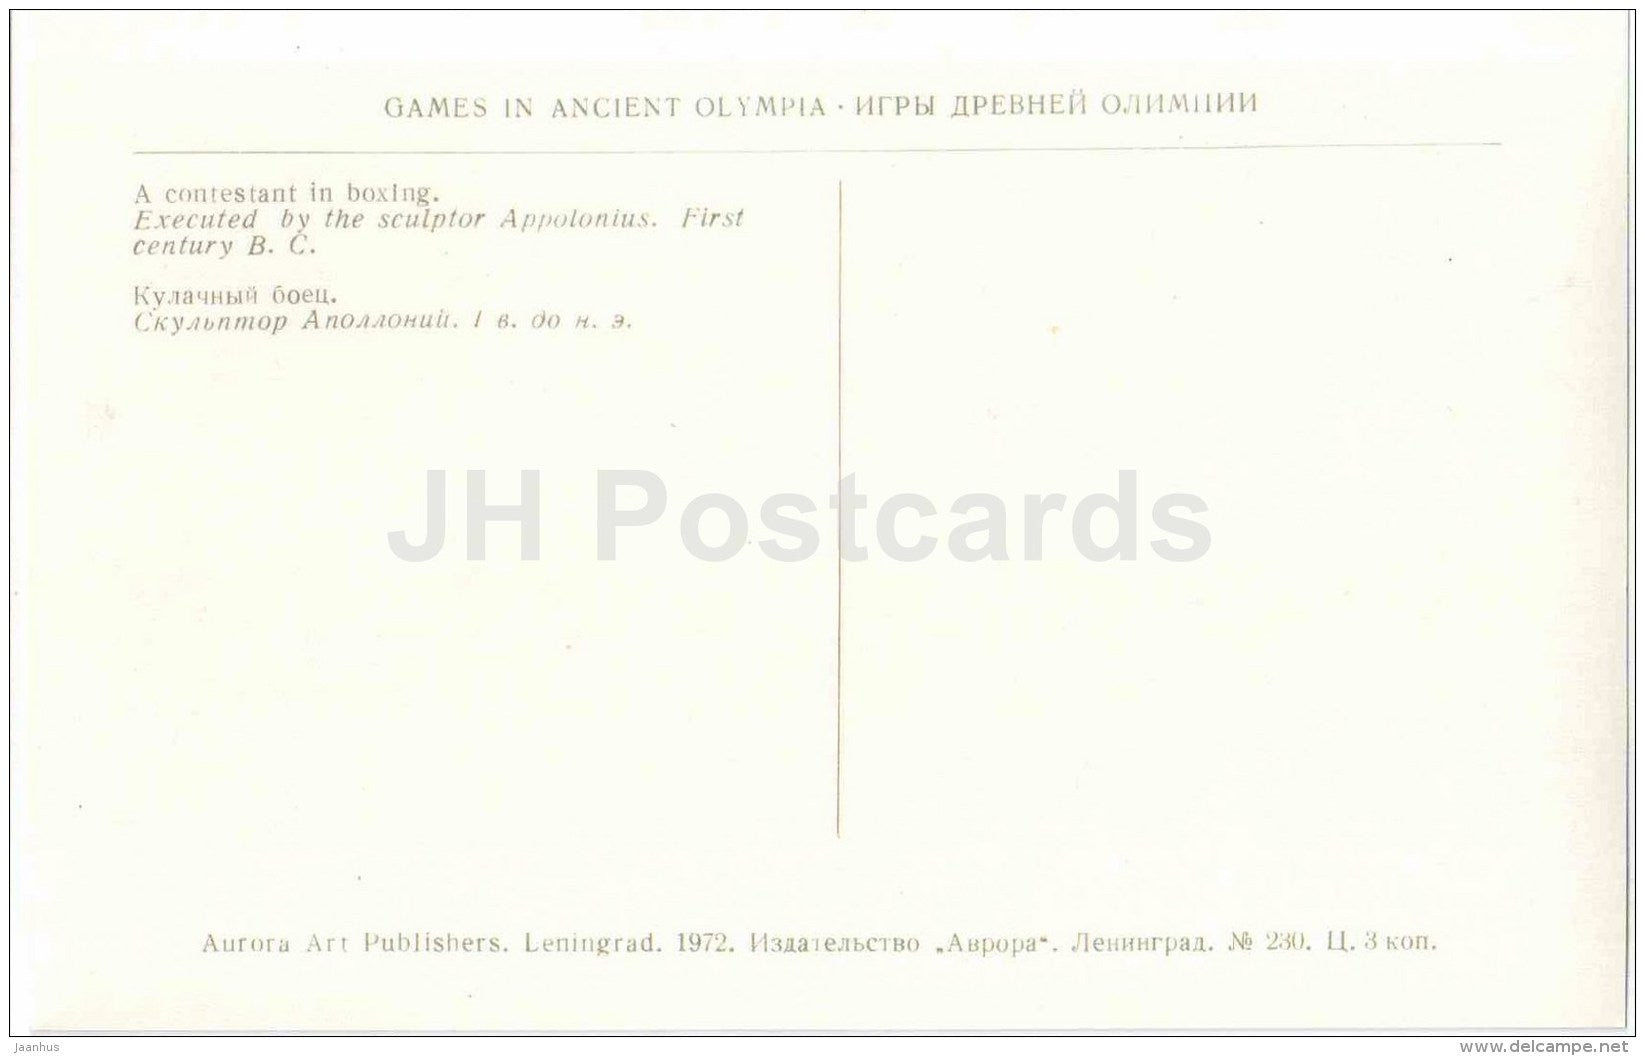 A Contestant in Boxing by Appolonius - sculpture - Games in Ancient Olympia - Greece - 1972 - Russia USSR - unused - JH Postcards